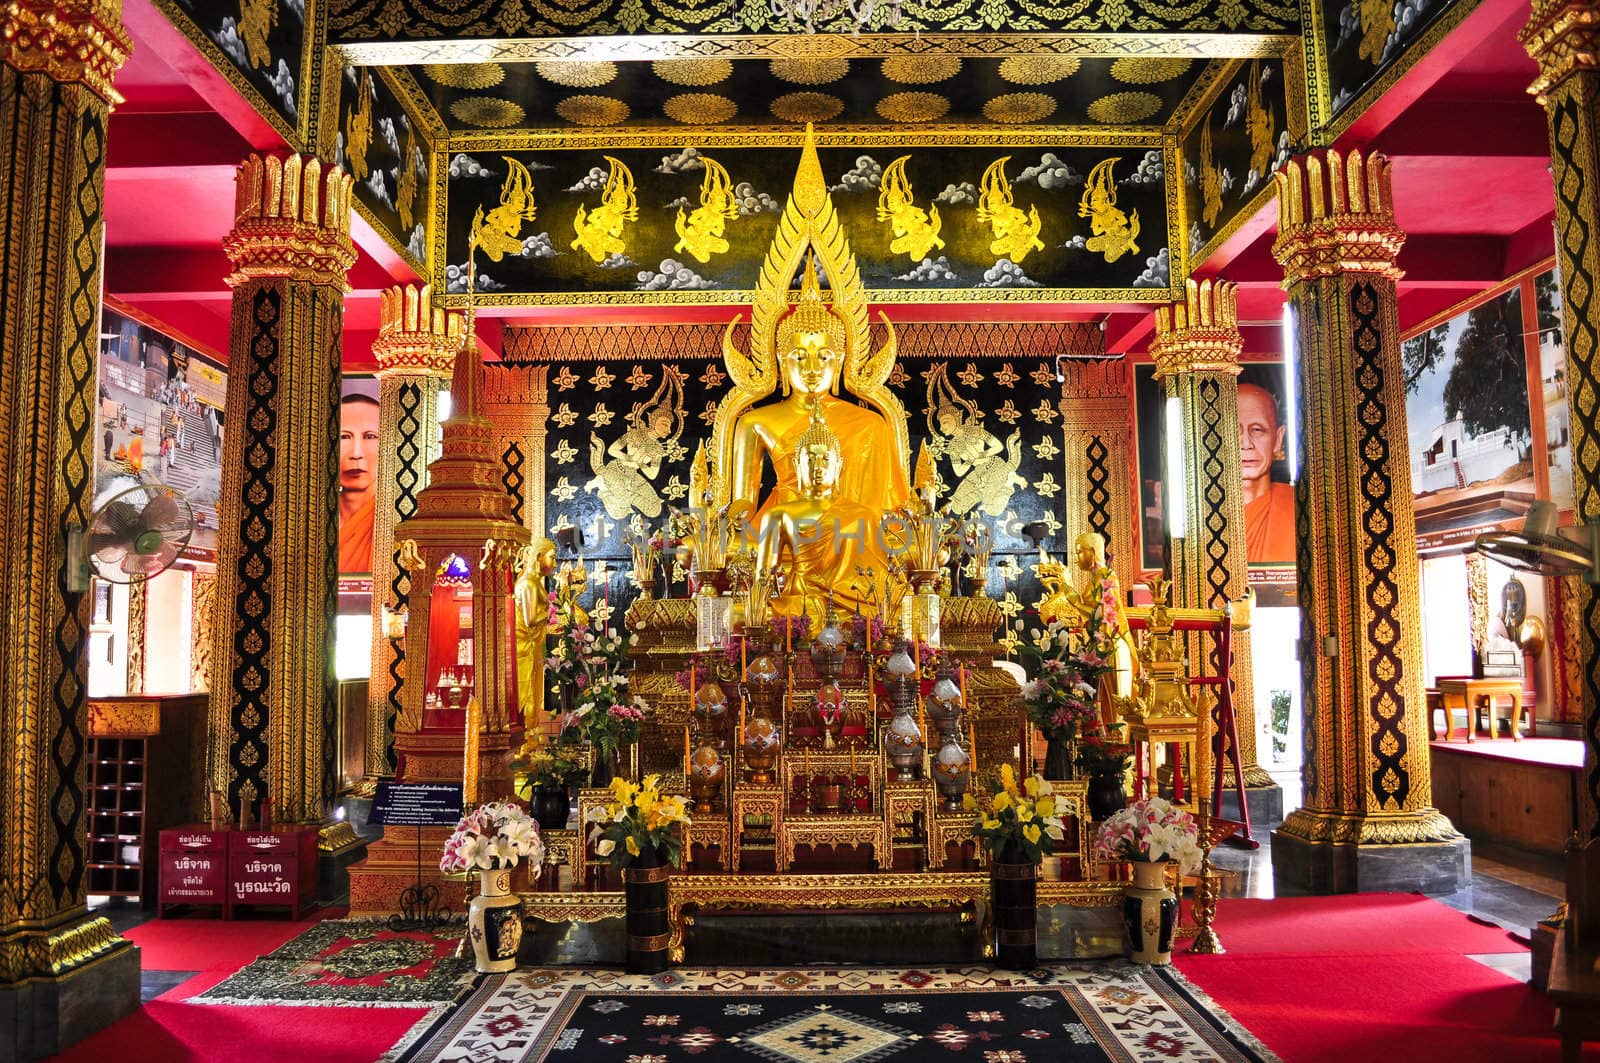 Golden buddhist shrine and decorations in Thailand